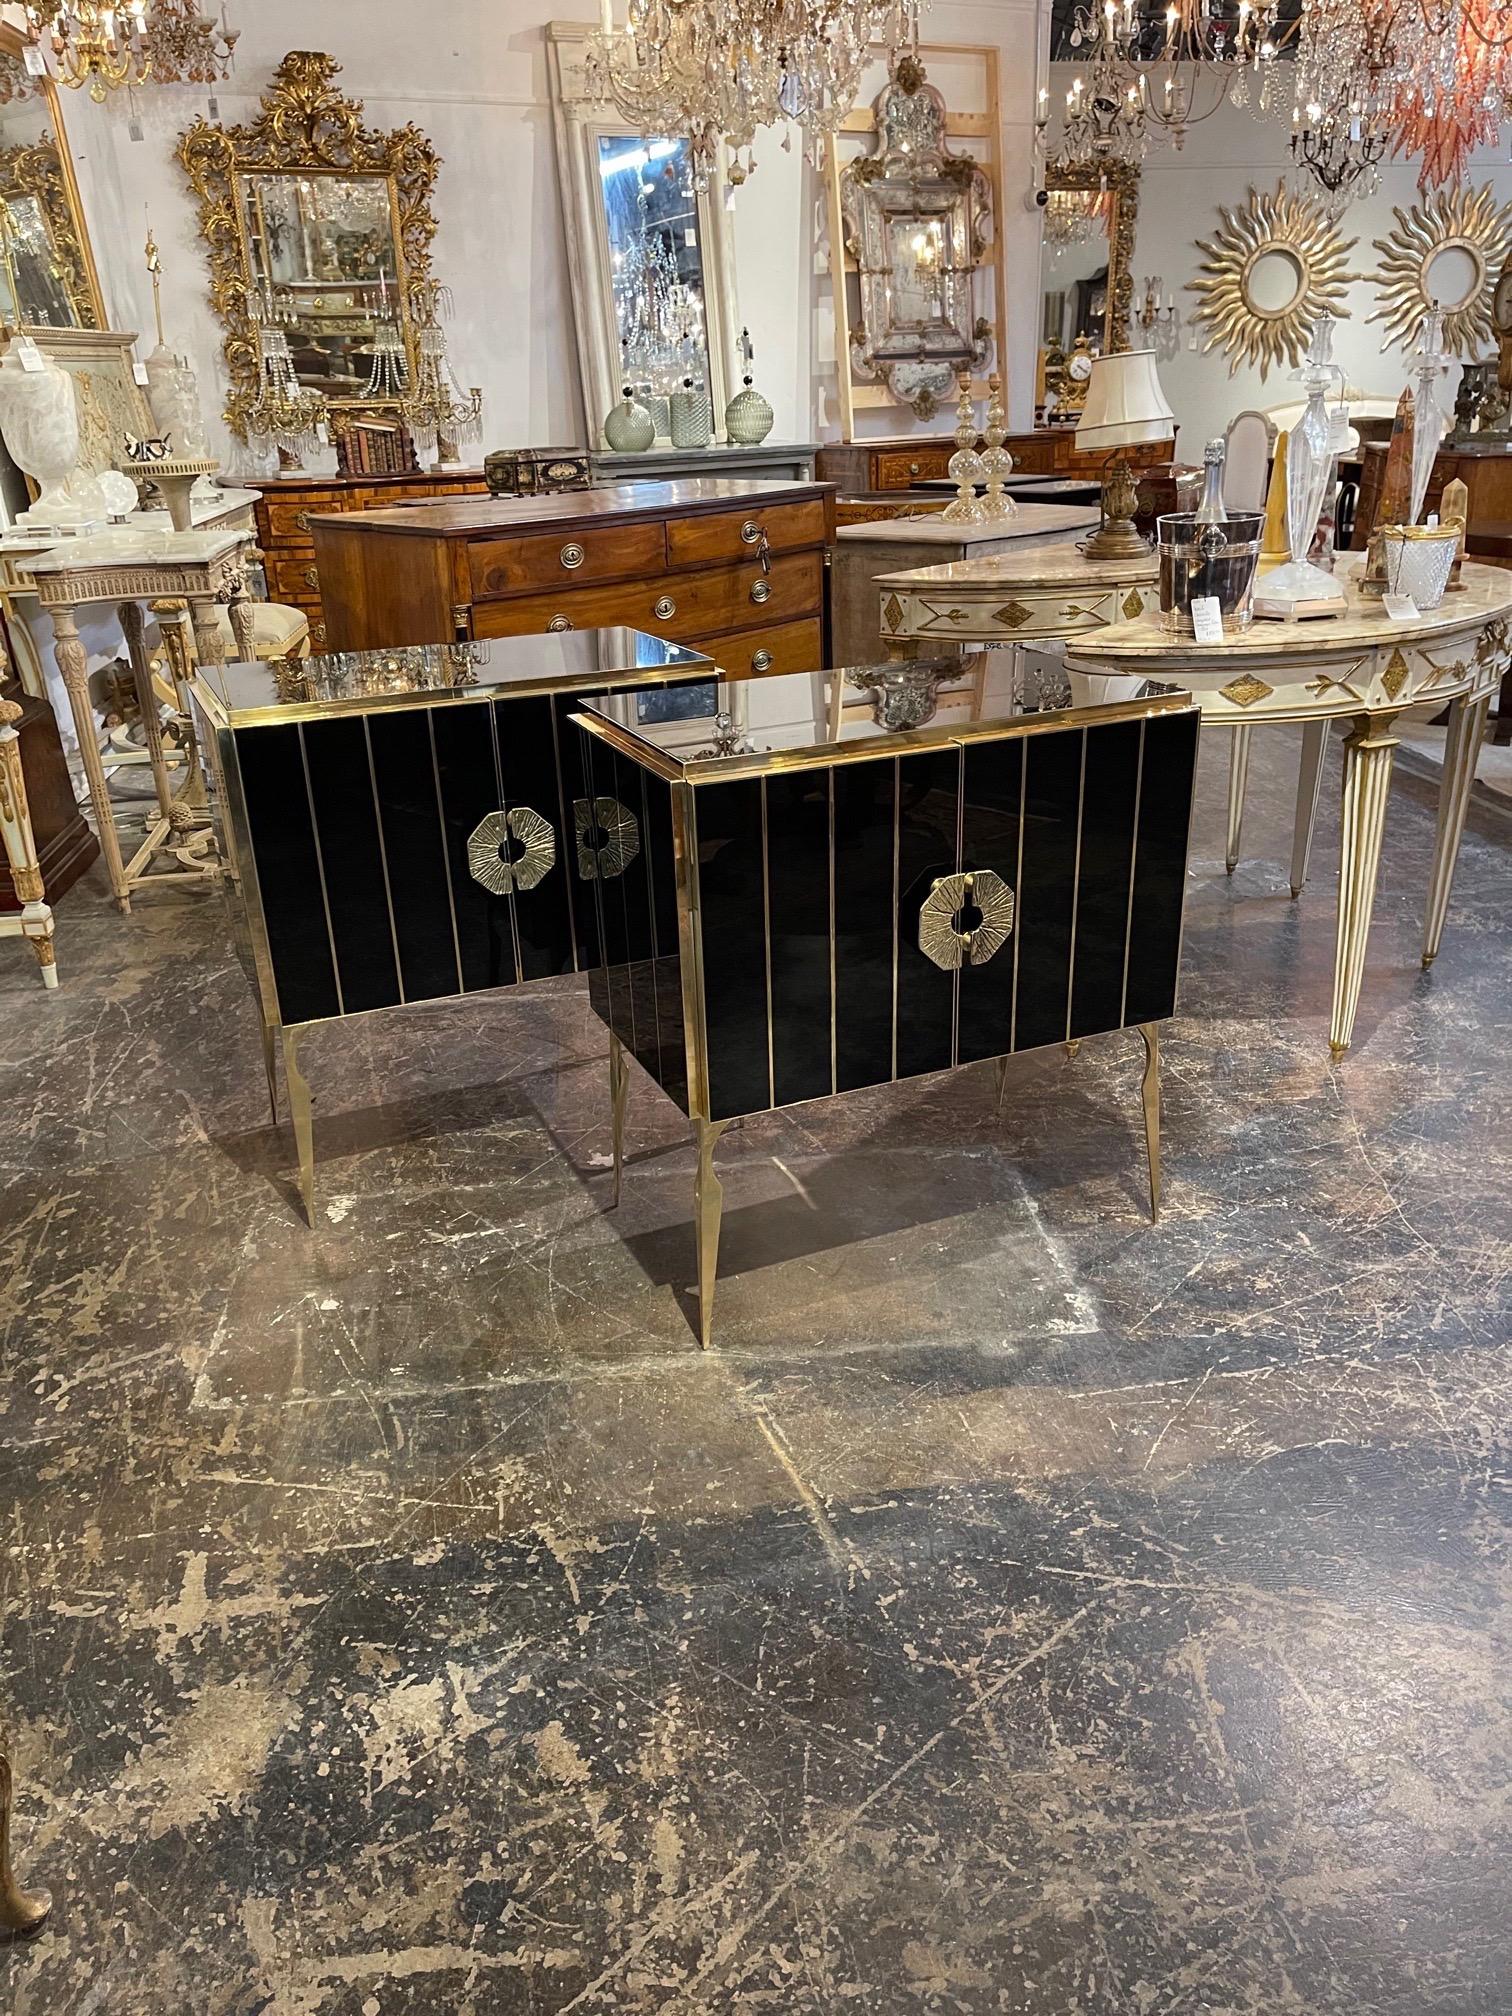 Very sleek pair of Murano glass and brass side tables. Creates an amazing polished look with the glistening black glass along with the decorative brass details and legs. Amazing!!